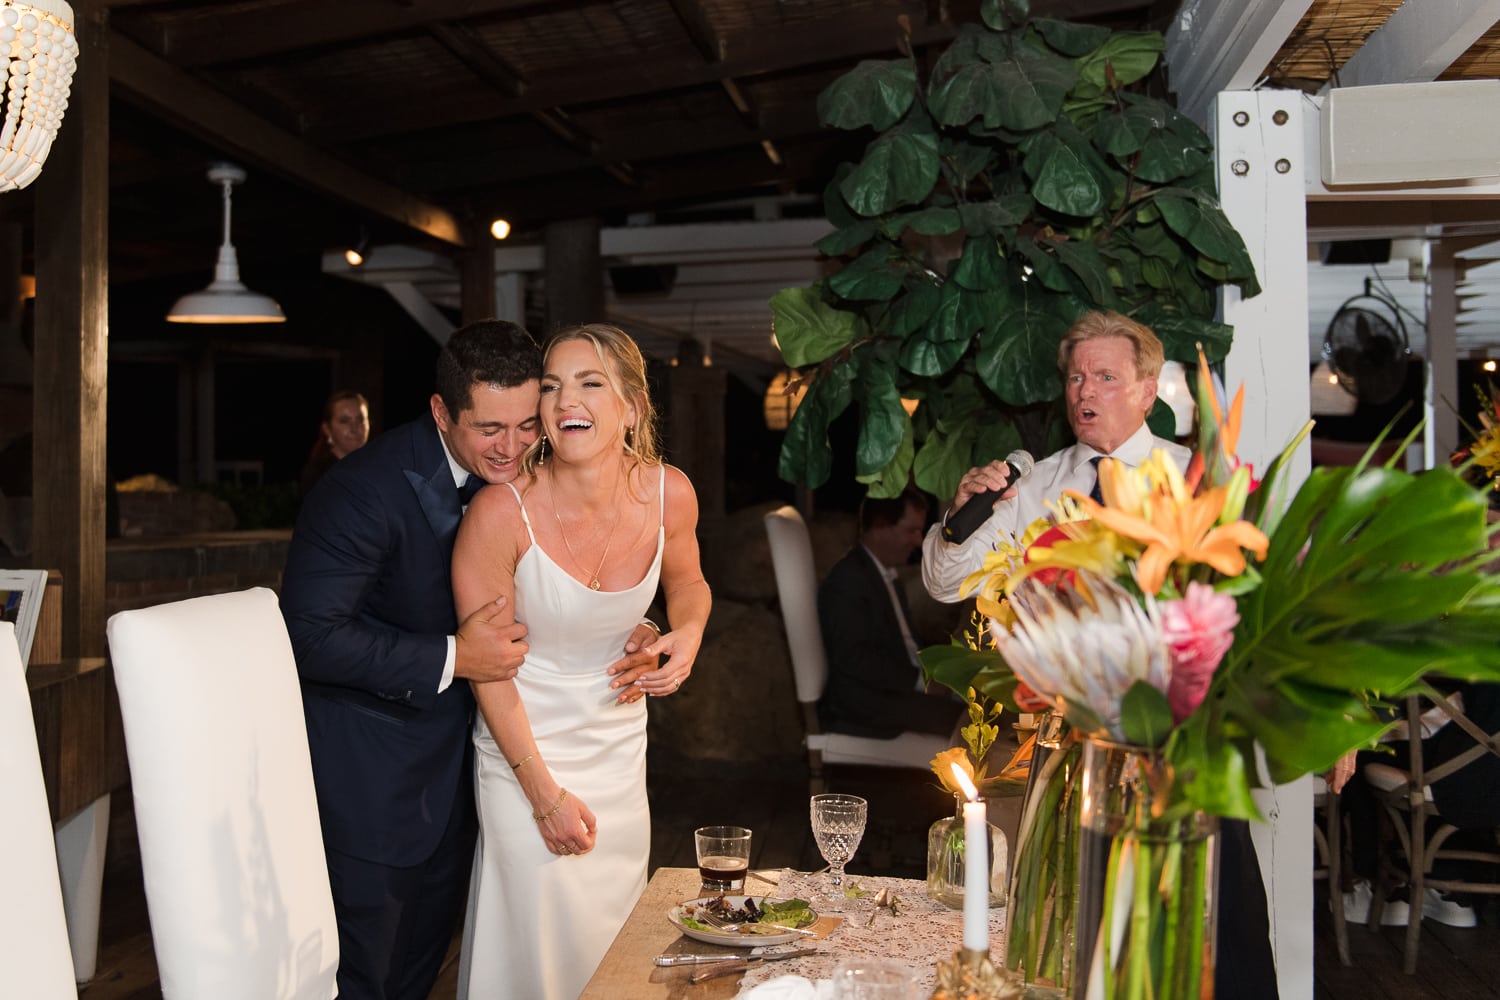 Celebrate your destination wedding with stunning multi-day wedding photography at Villa Montana Beach Resort, Isabela, PR. Book a wedding weekend photography package today.